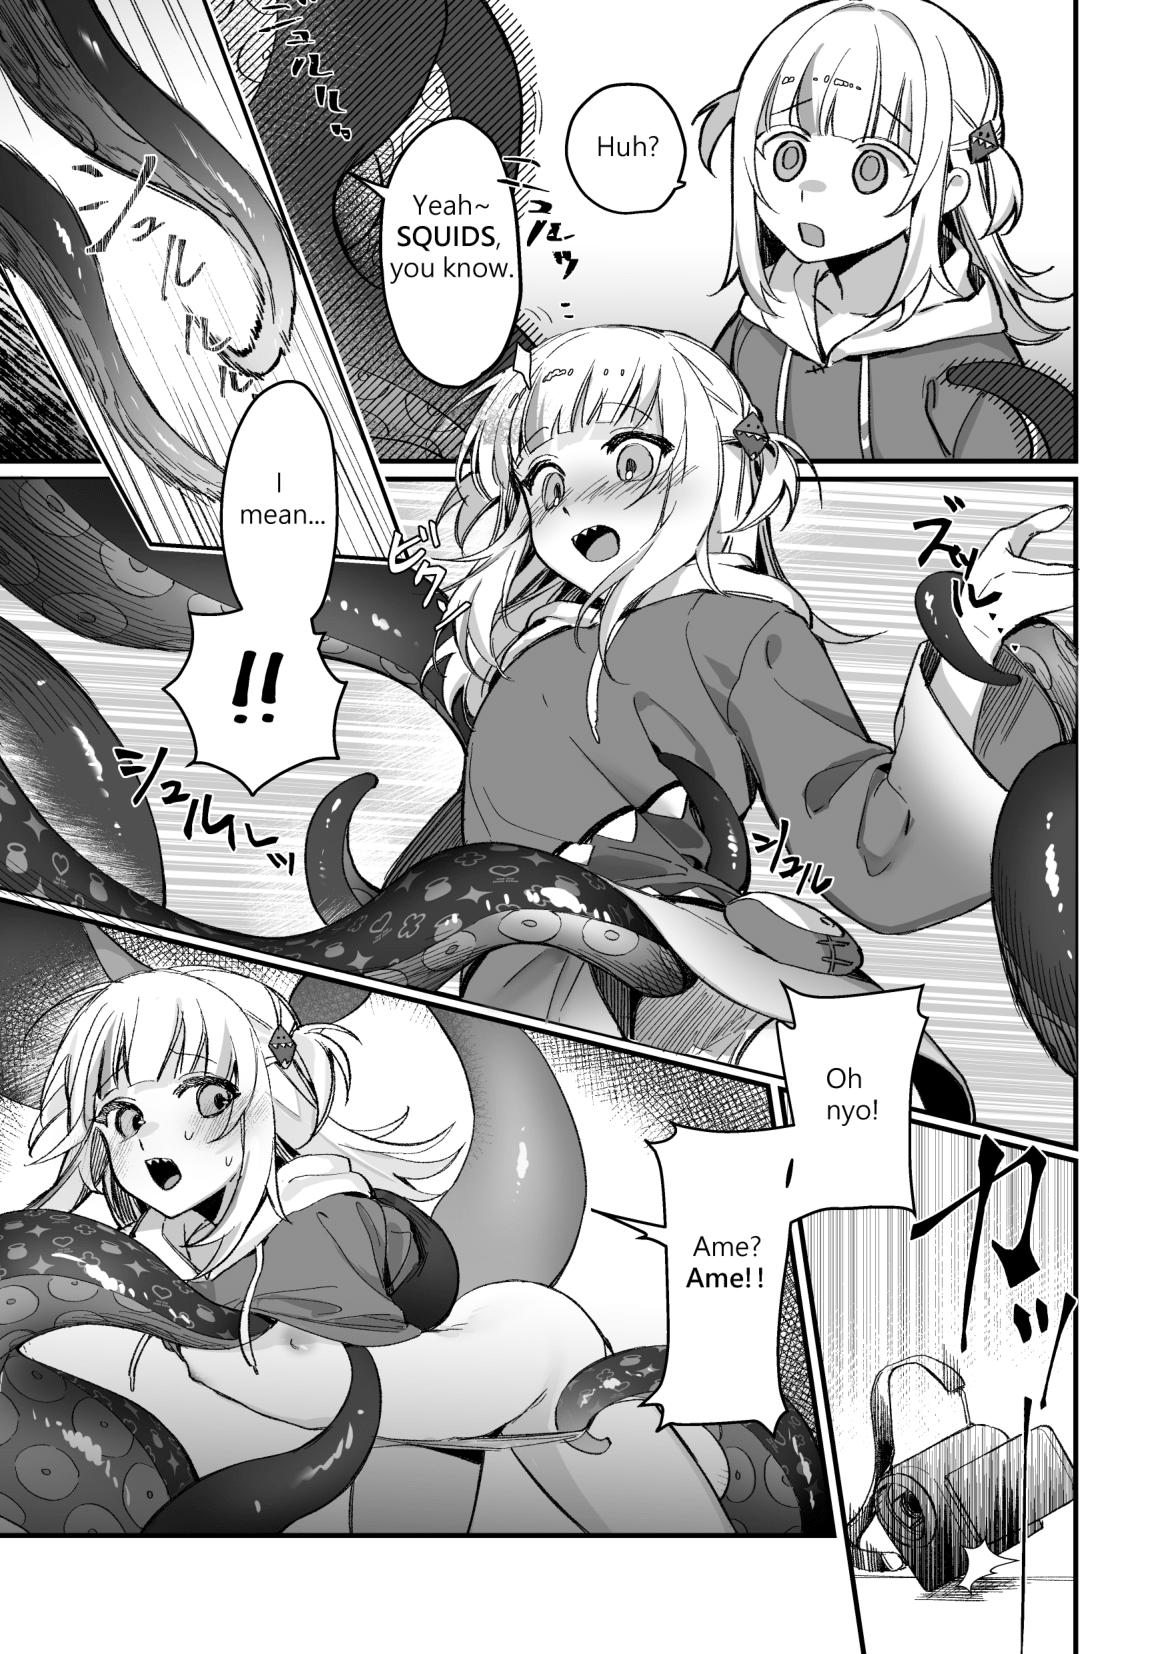 Nude 【R-18 Comic】Tentacle!! Ina's Boing Boing is out of control!! - Hololive Transvestite - Page 5